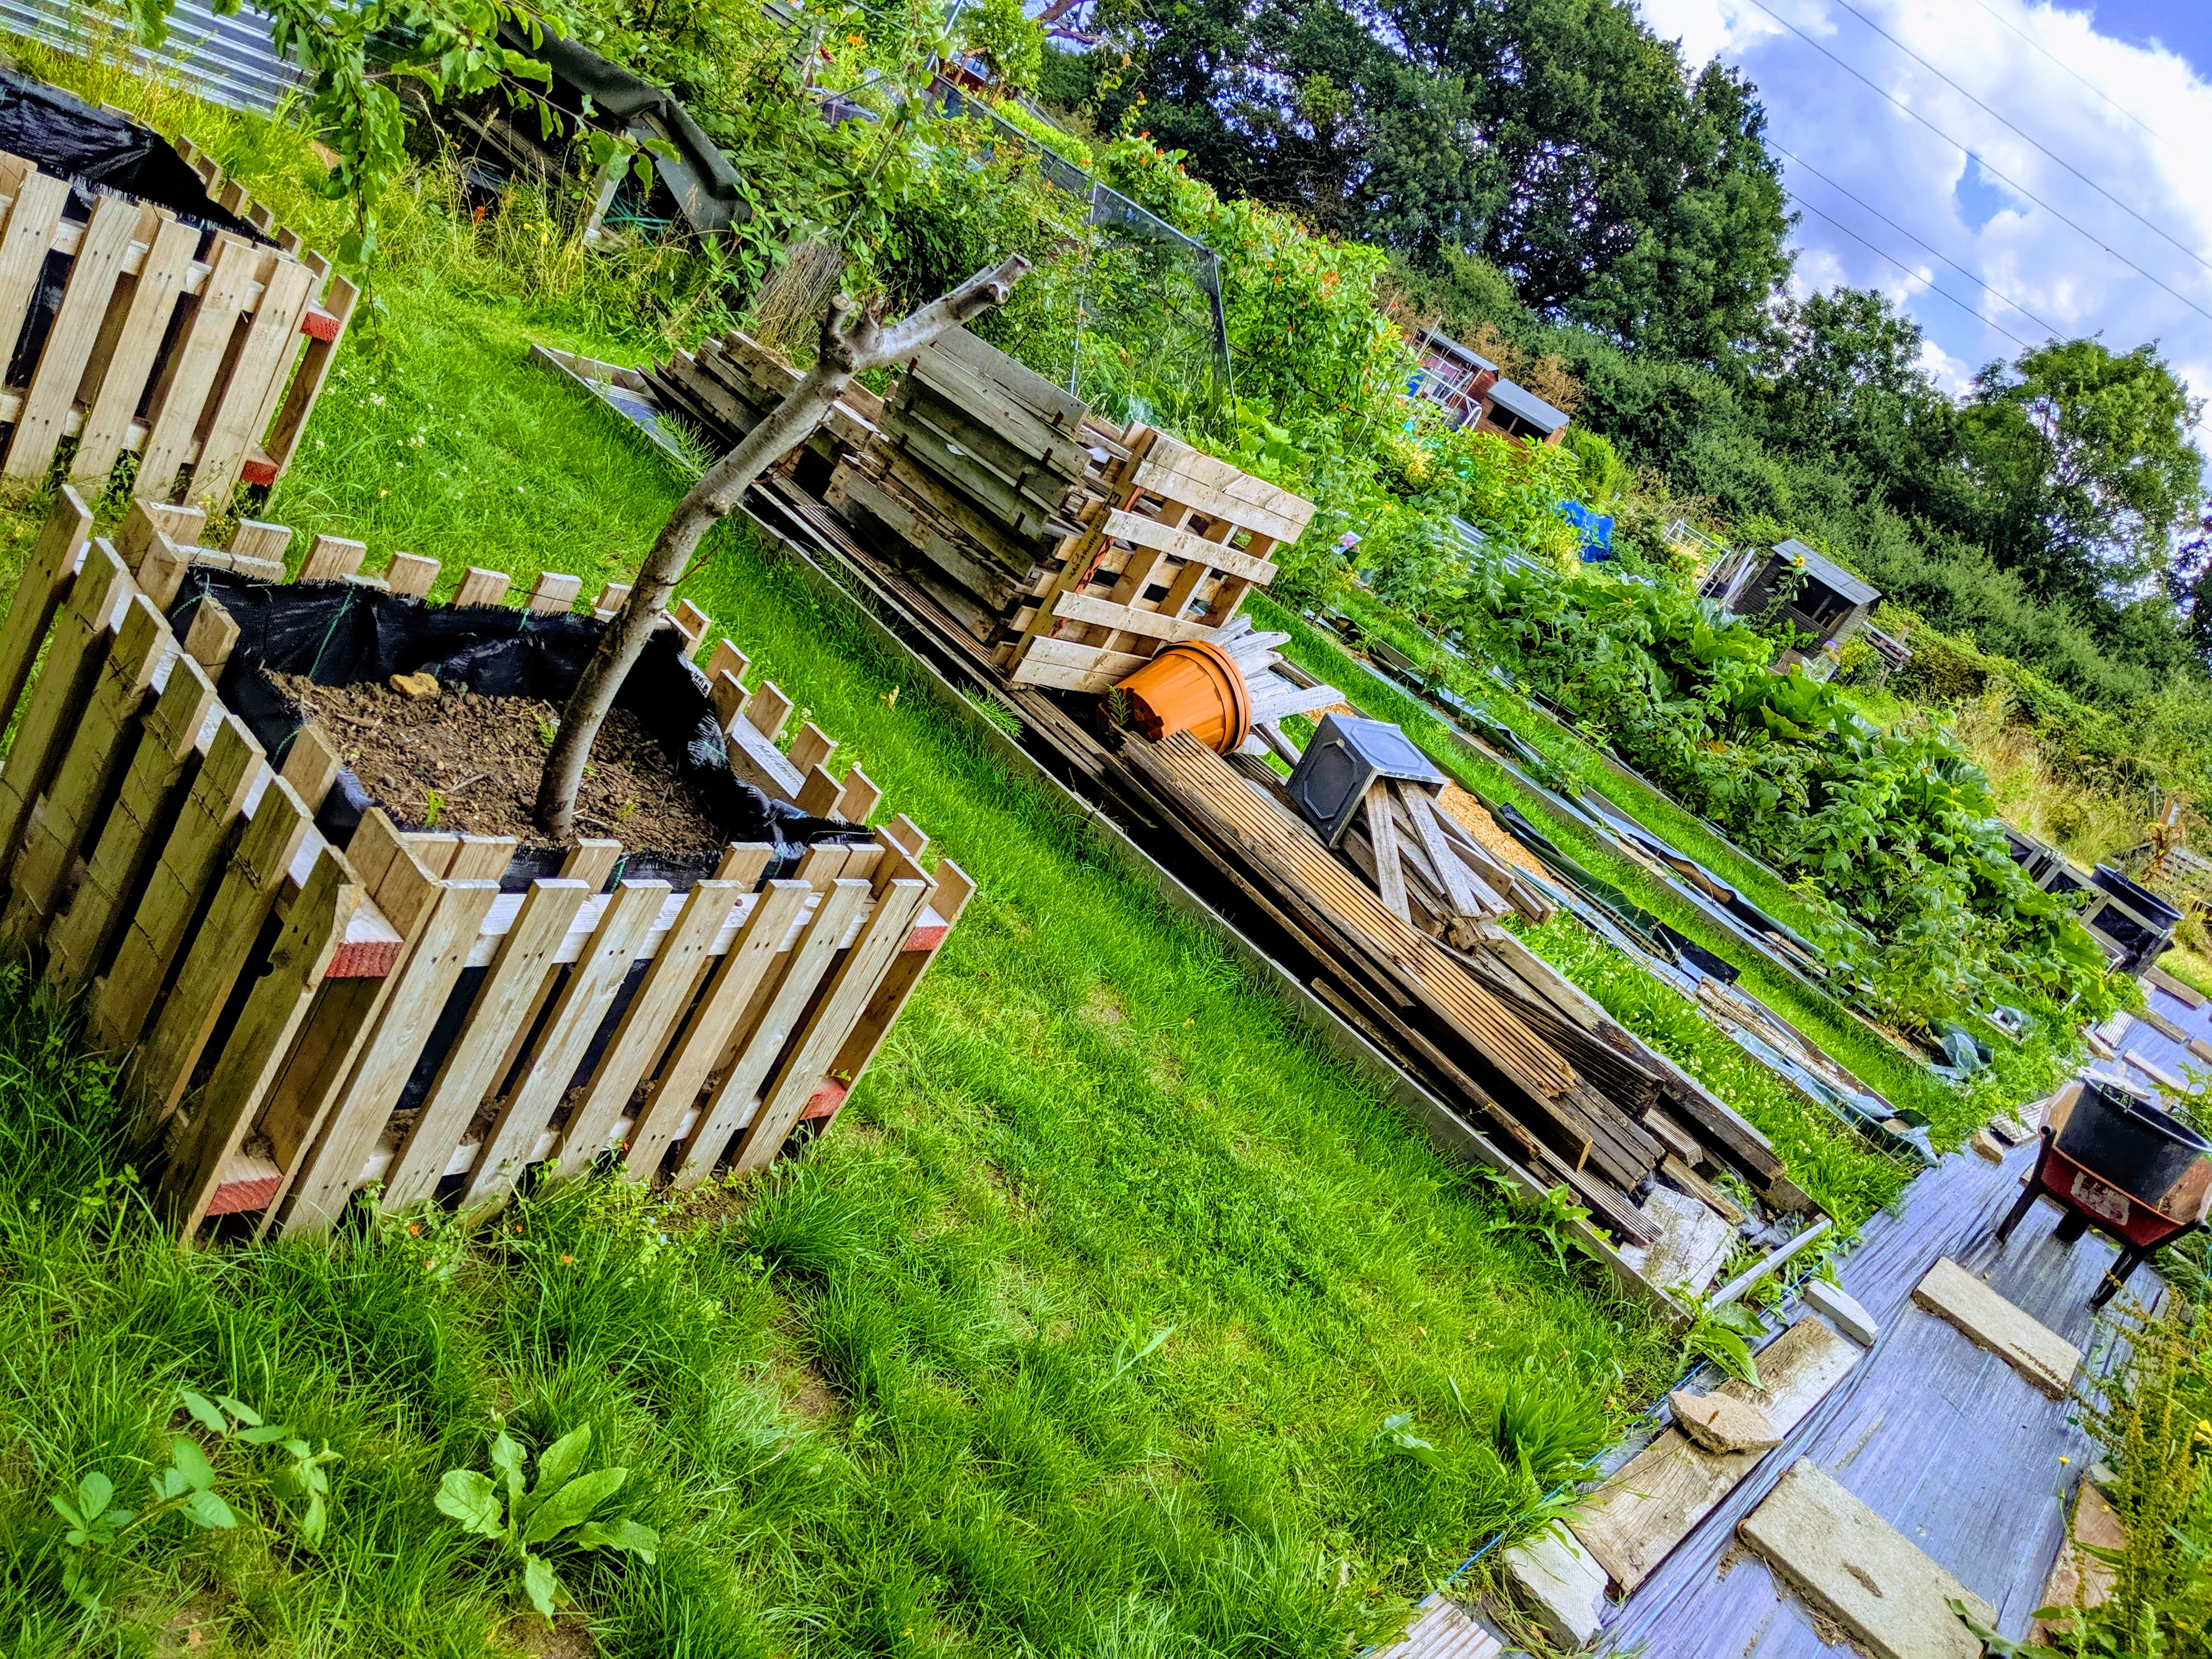 Dealing with an allotment after you’ve been on holiday